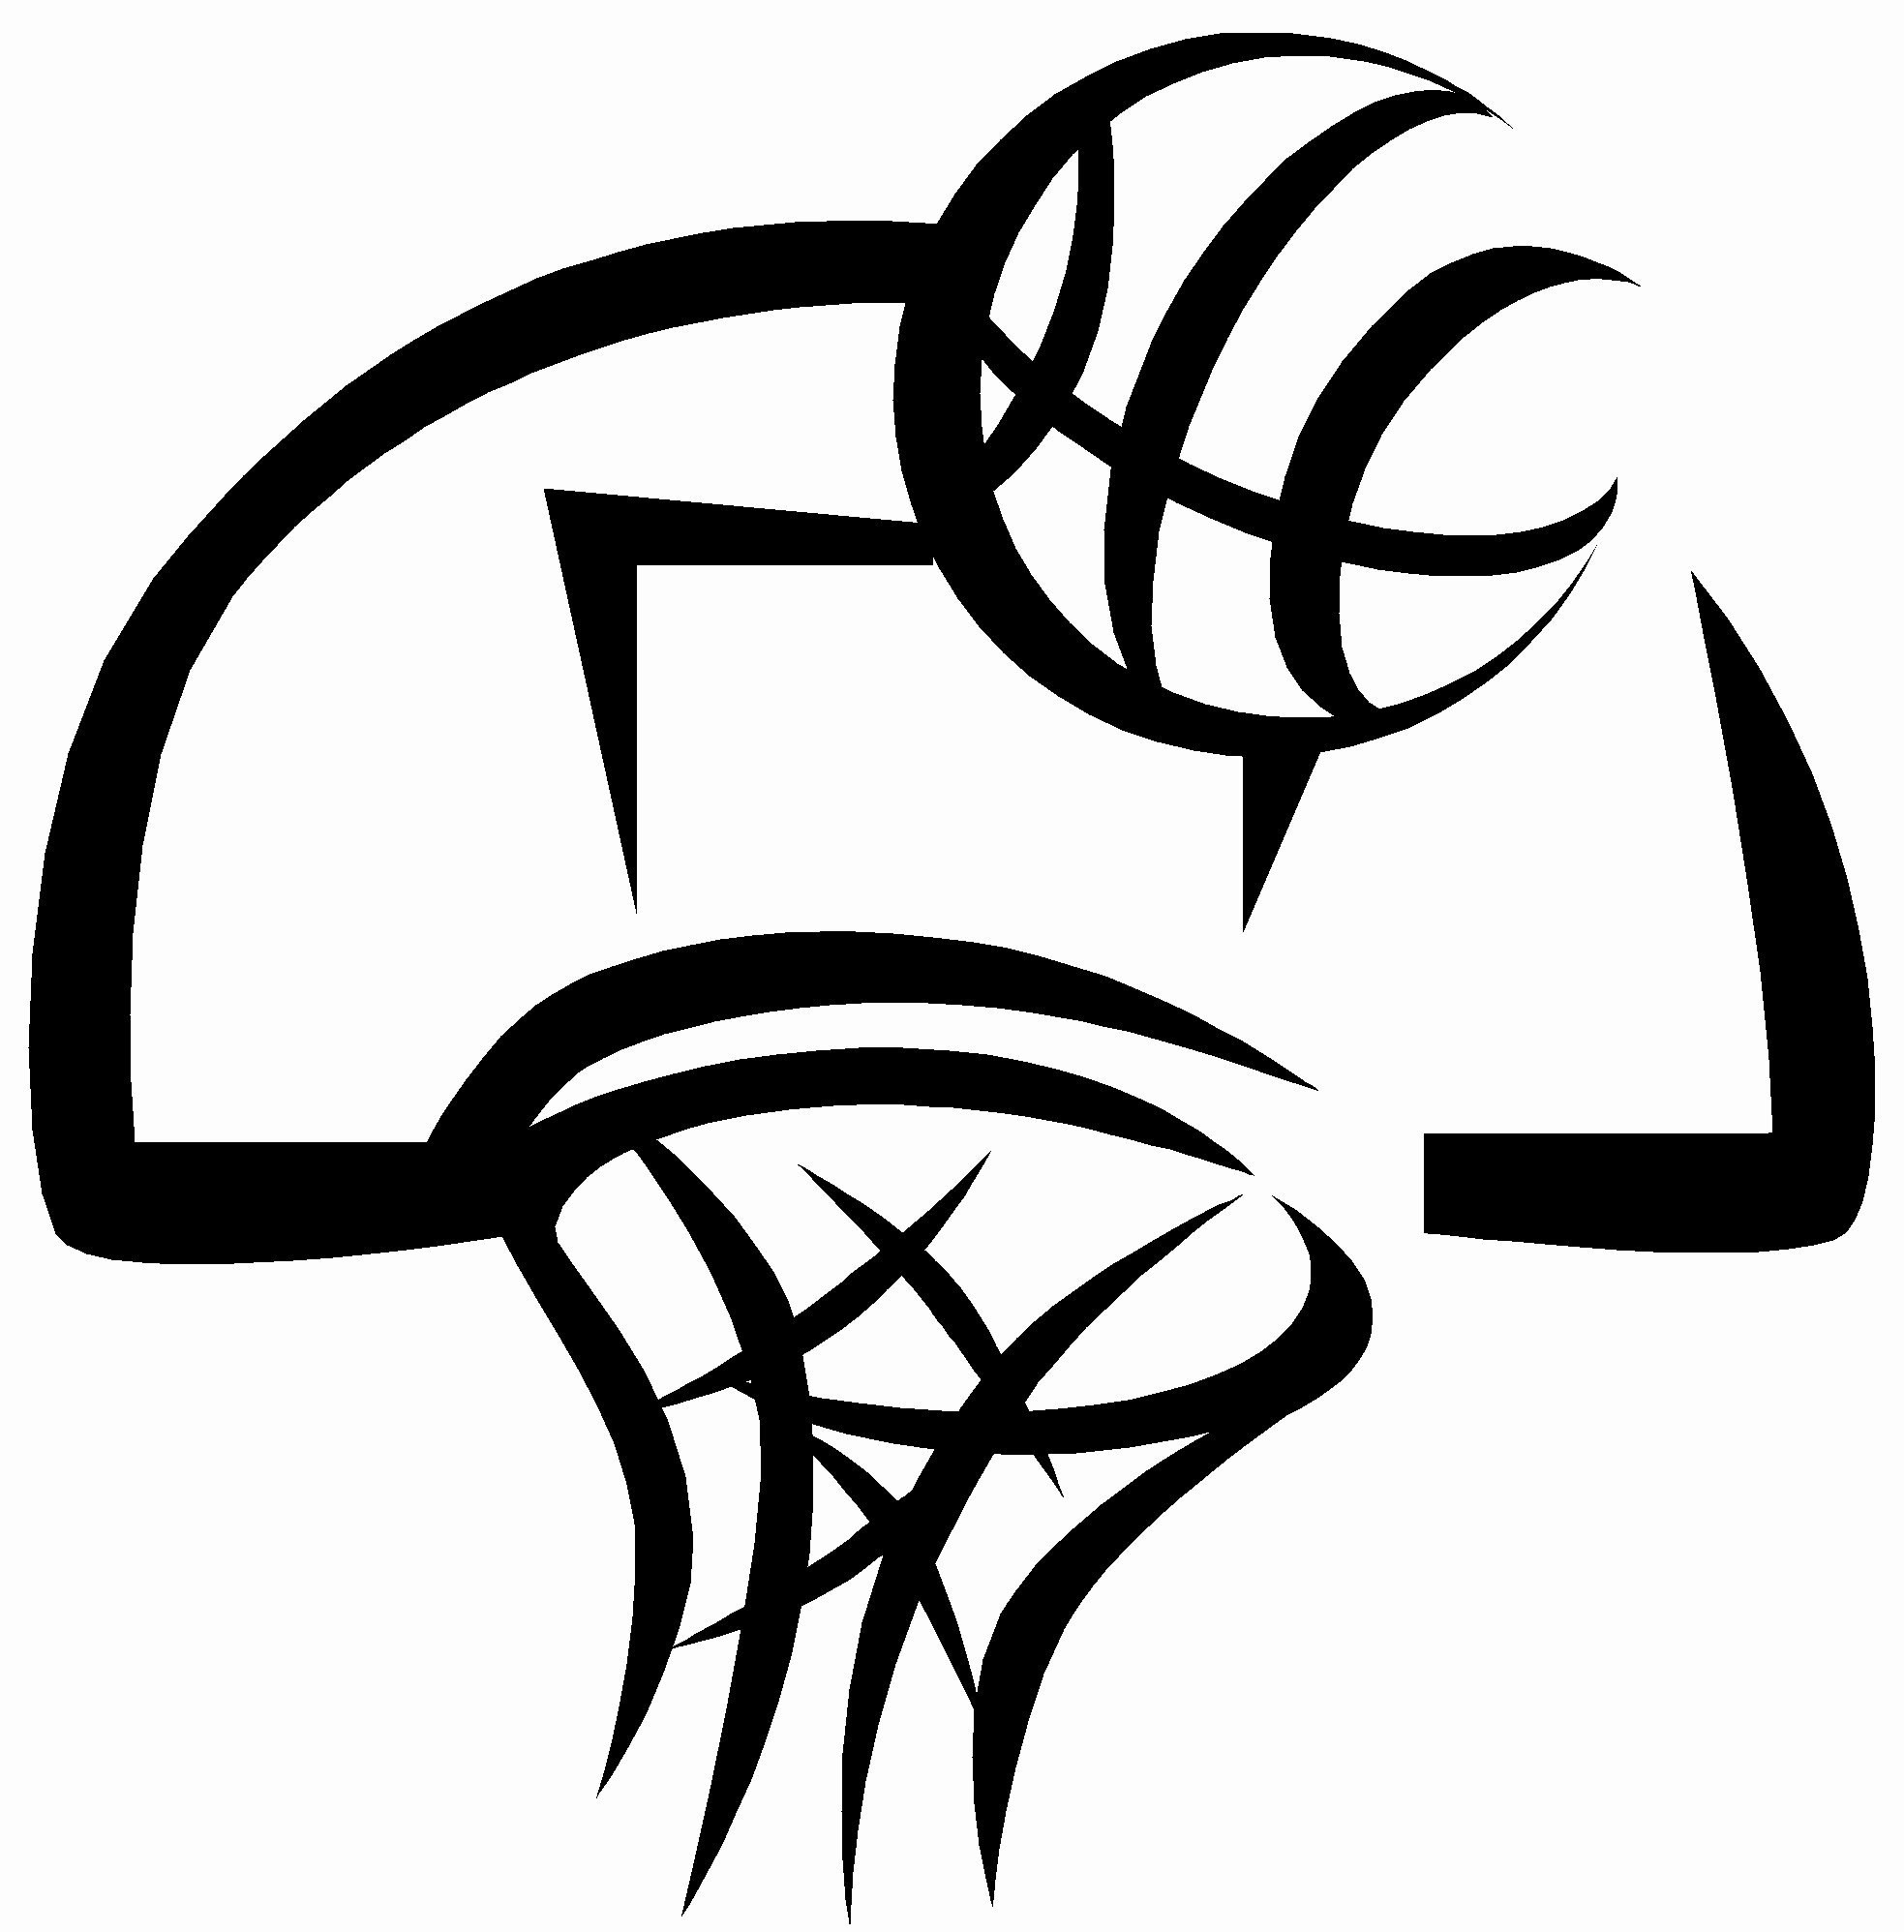 Basketball Black And White Clipart & Basketball Black And White.